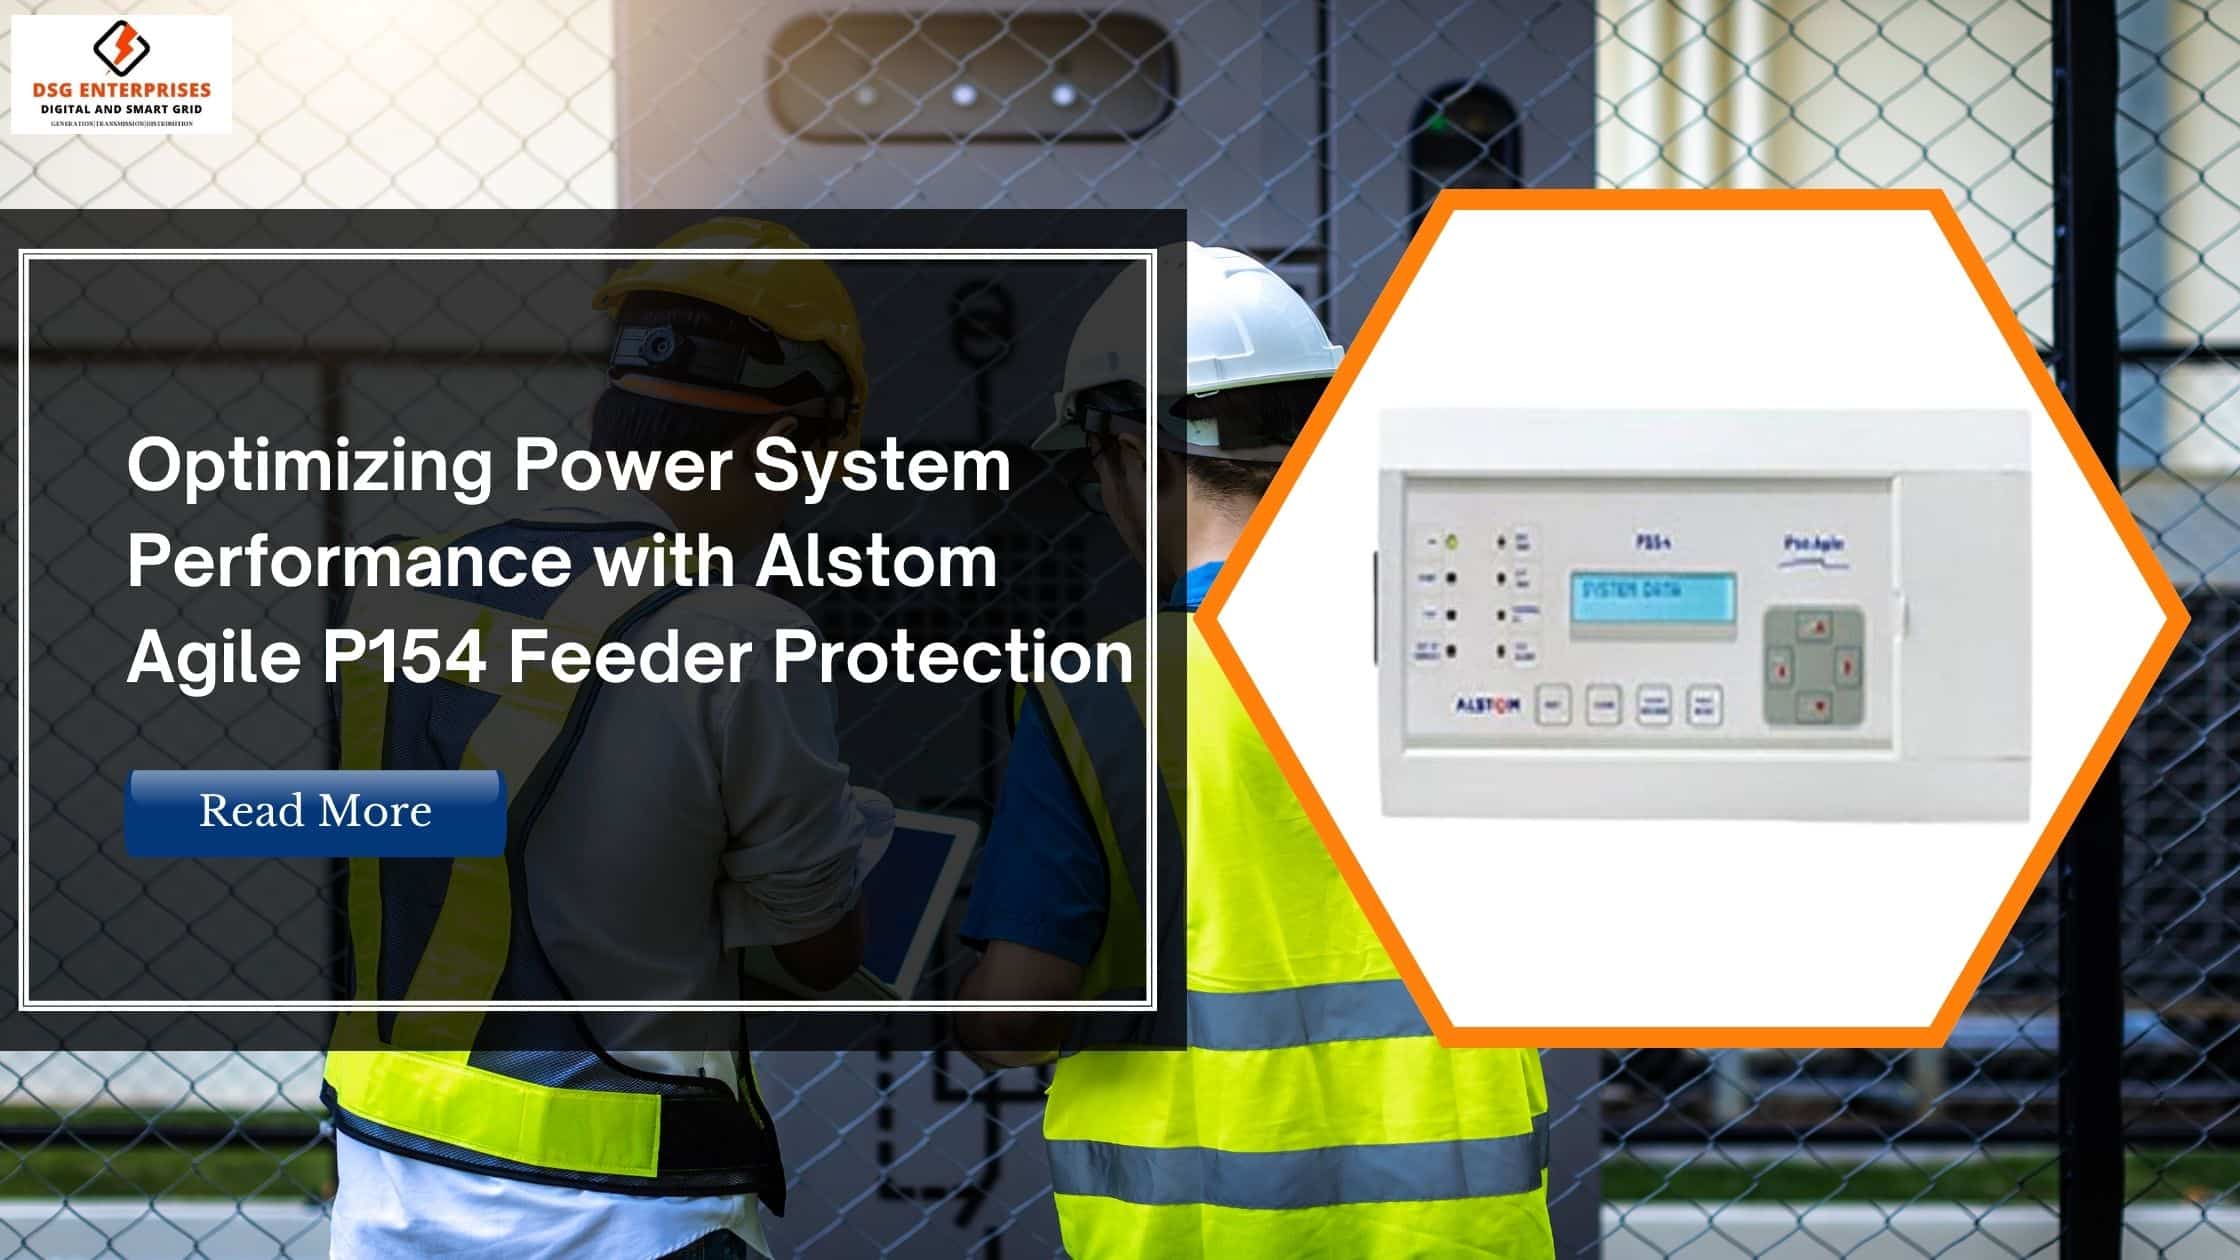 You are currently viewing Optimizing Power System Performance with Alstom Agile P154 Feeder Protection